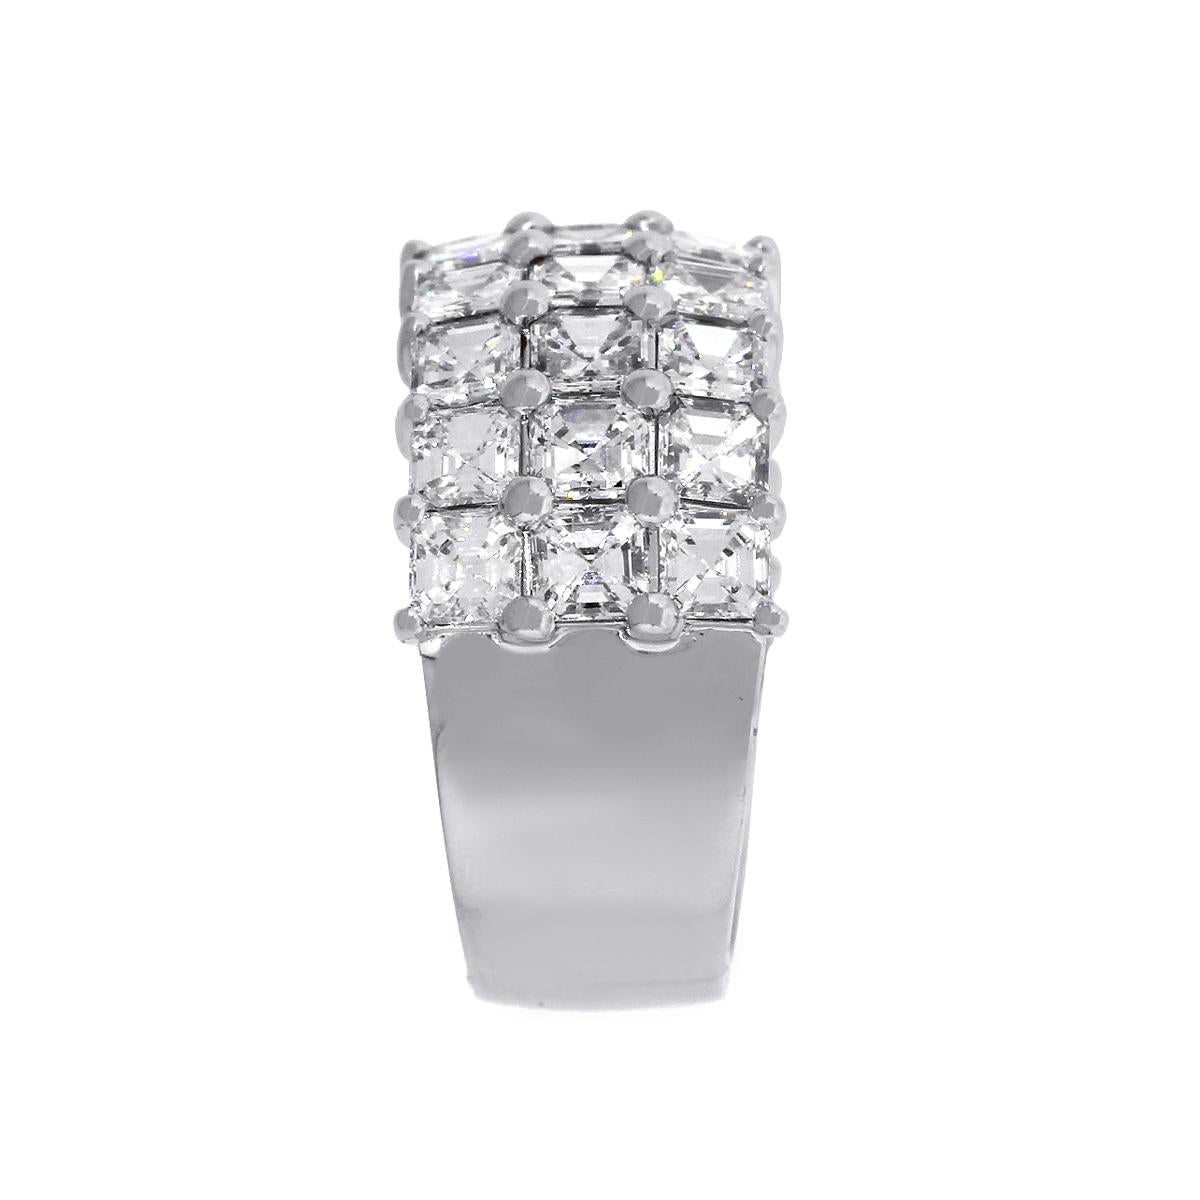 Material: 18k White Gold
Diamond Details: Approximately 4.59ctw of Asscher Cut Diamonds. Diamonds are G/H in color and VS in clarity
Size: 6.25
Total Weight: 10.2g (6.5 dwt)
Measurements: 0.85″ x 0.40″ x 0.80″
SKU: A30311891